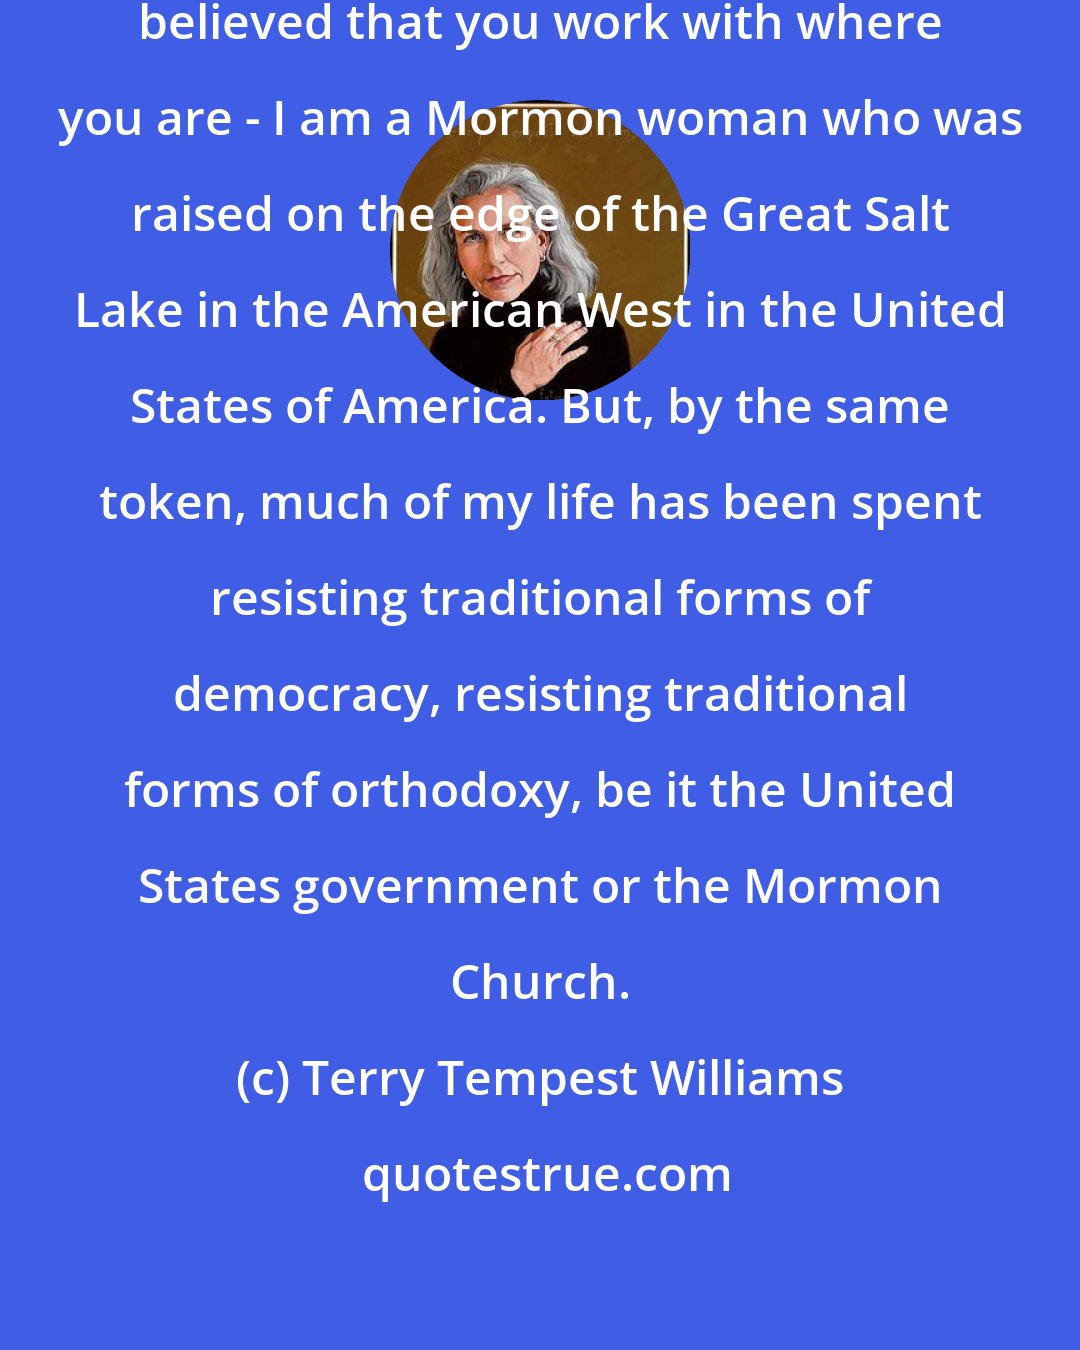 Terry Tempest Williams: Well, we are Americans. I've always believed that you work with where you are - I am a Mormon woman who was raised on the edge of the Great Salt Lake in the American West in the United States of America. But, by the same token, much of my life has been spent resisting traditional forms of democracy, resisting traditional forms of orthodoxy, be it the United States government or the Mormon Church.